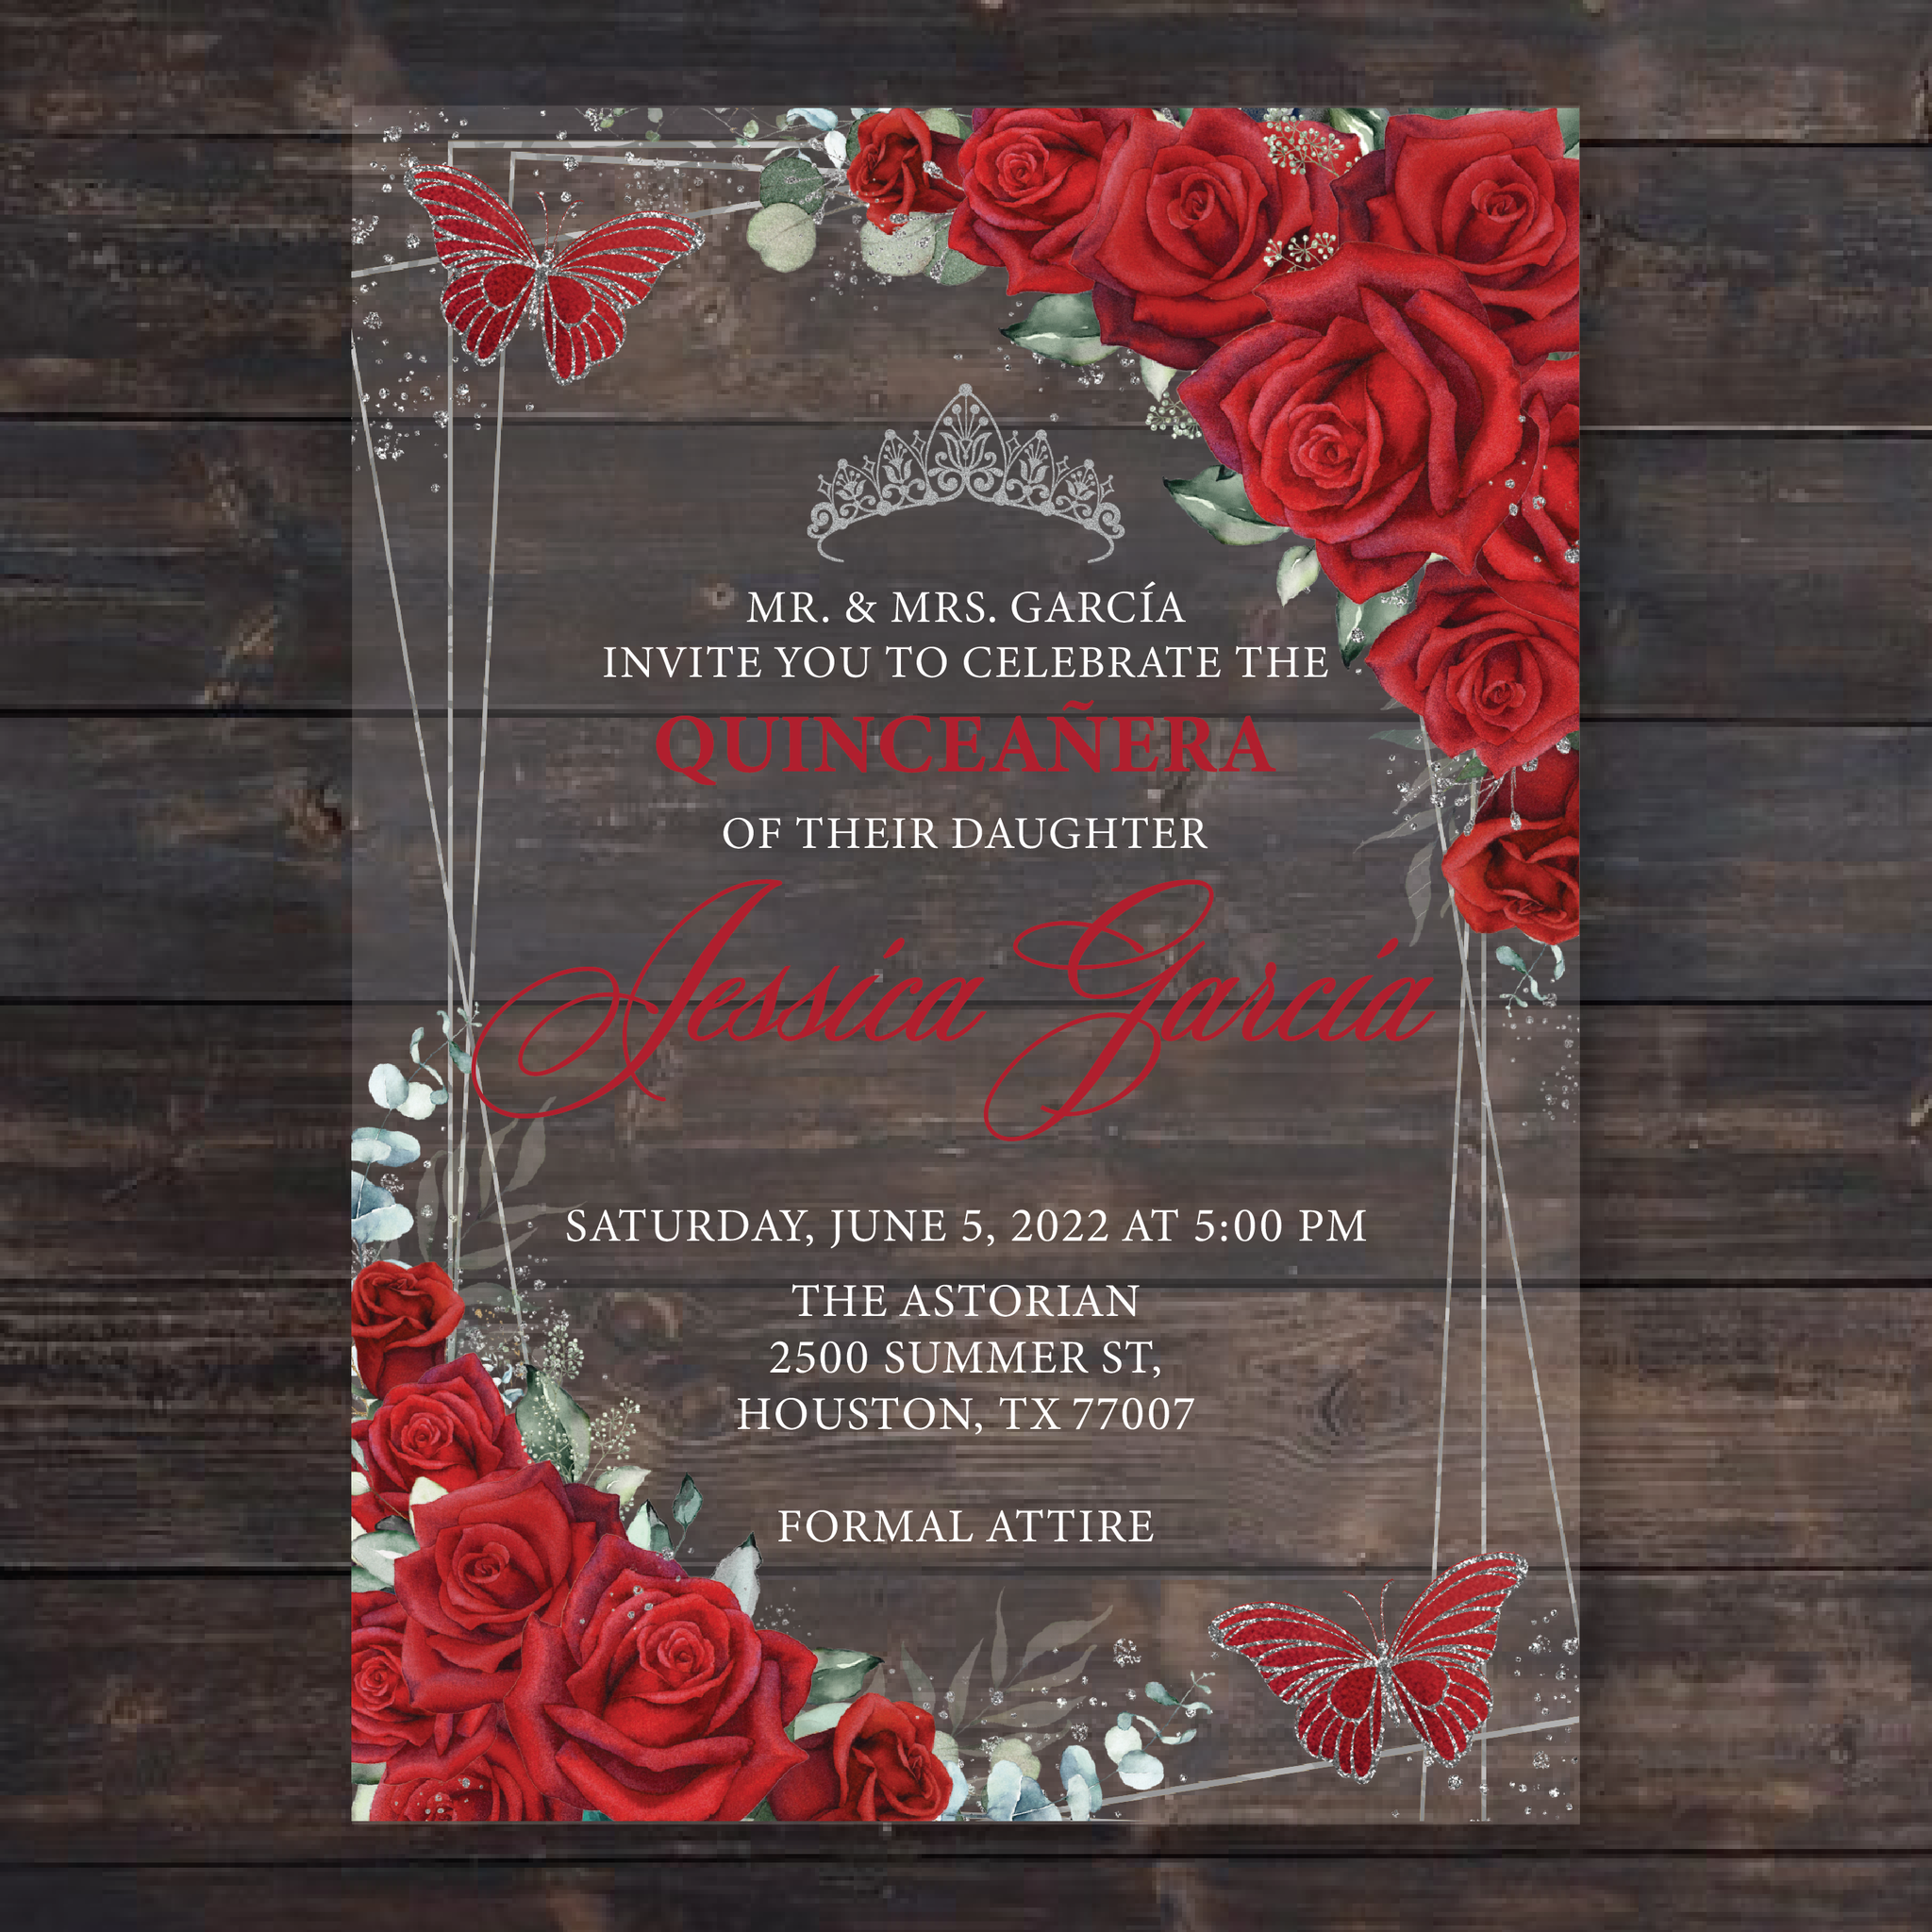 Black Floral Butterflies and Gold Geometric Acrylic Invitations